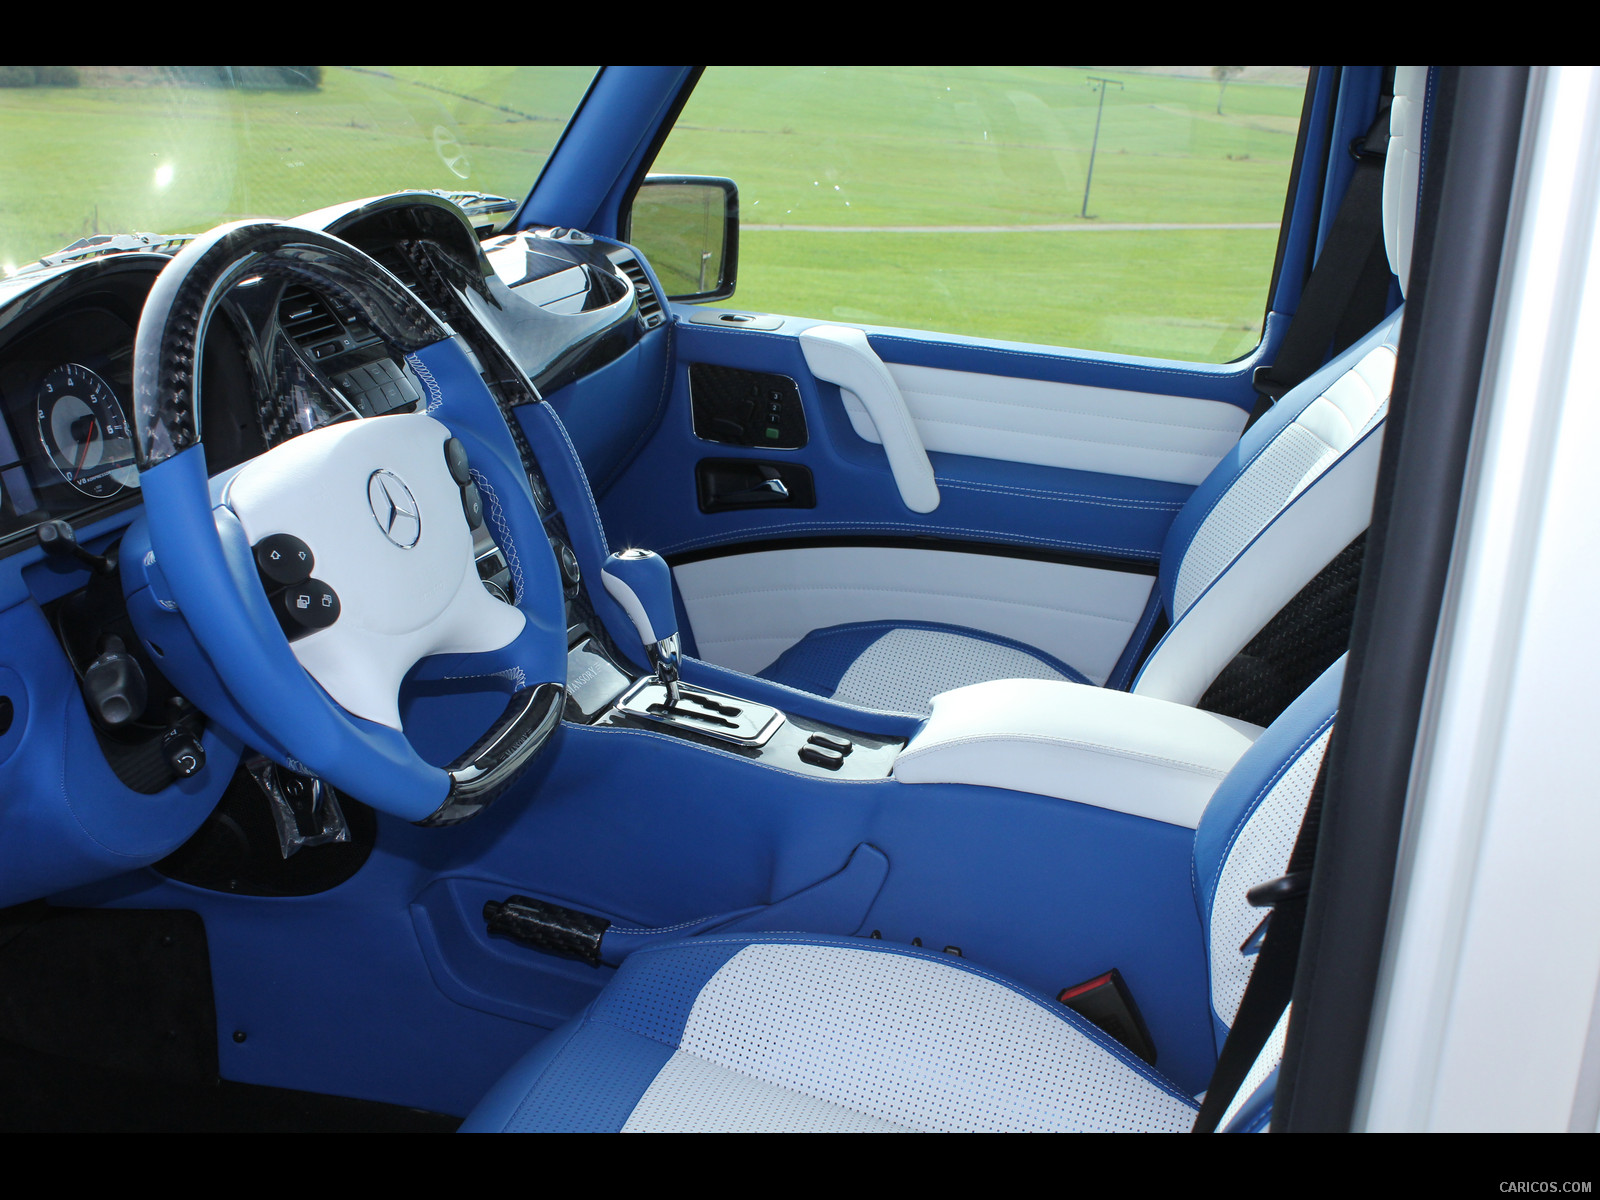 Mansory G Couture Based On Mercedes G Class Interior Wallpaper 31